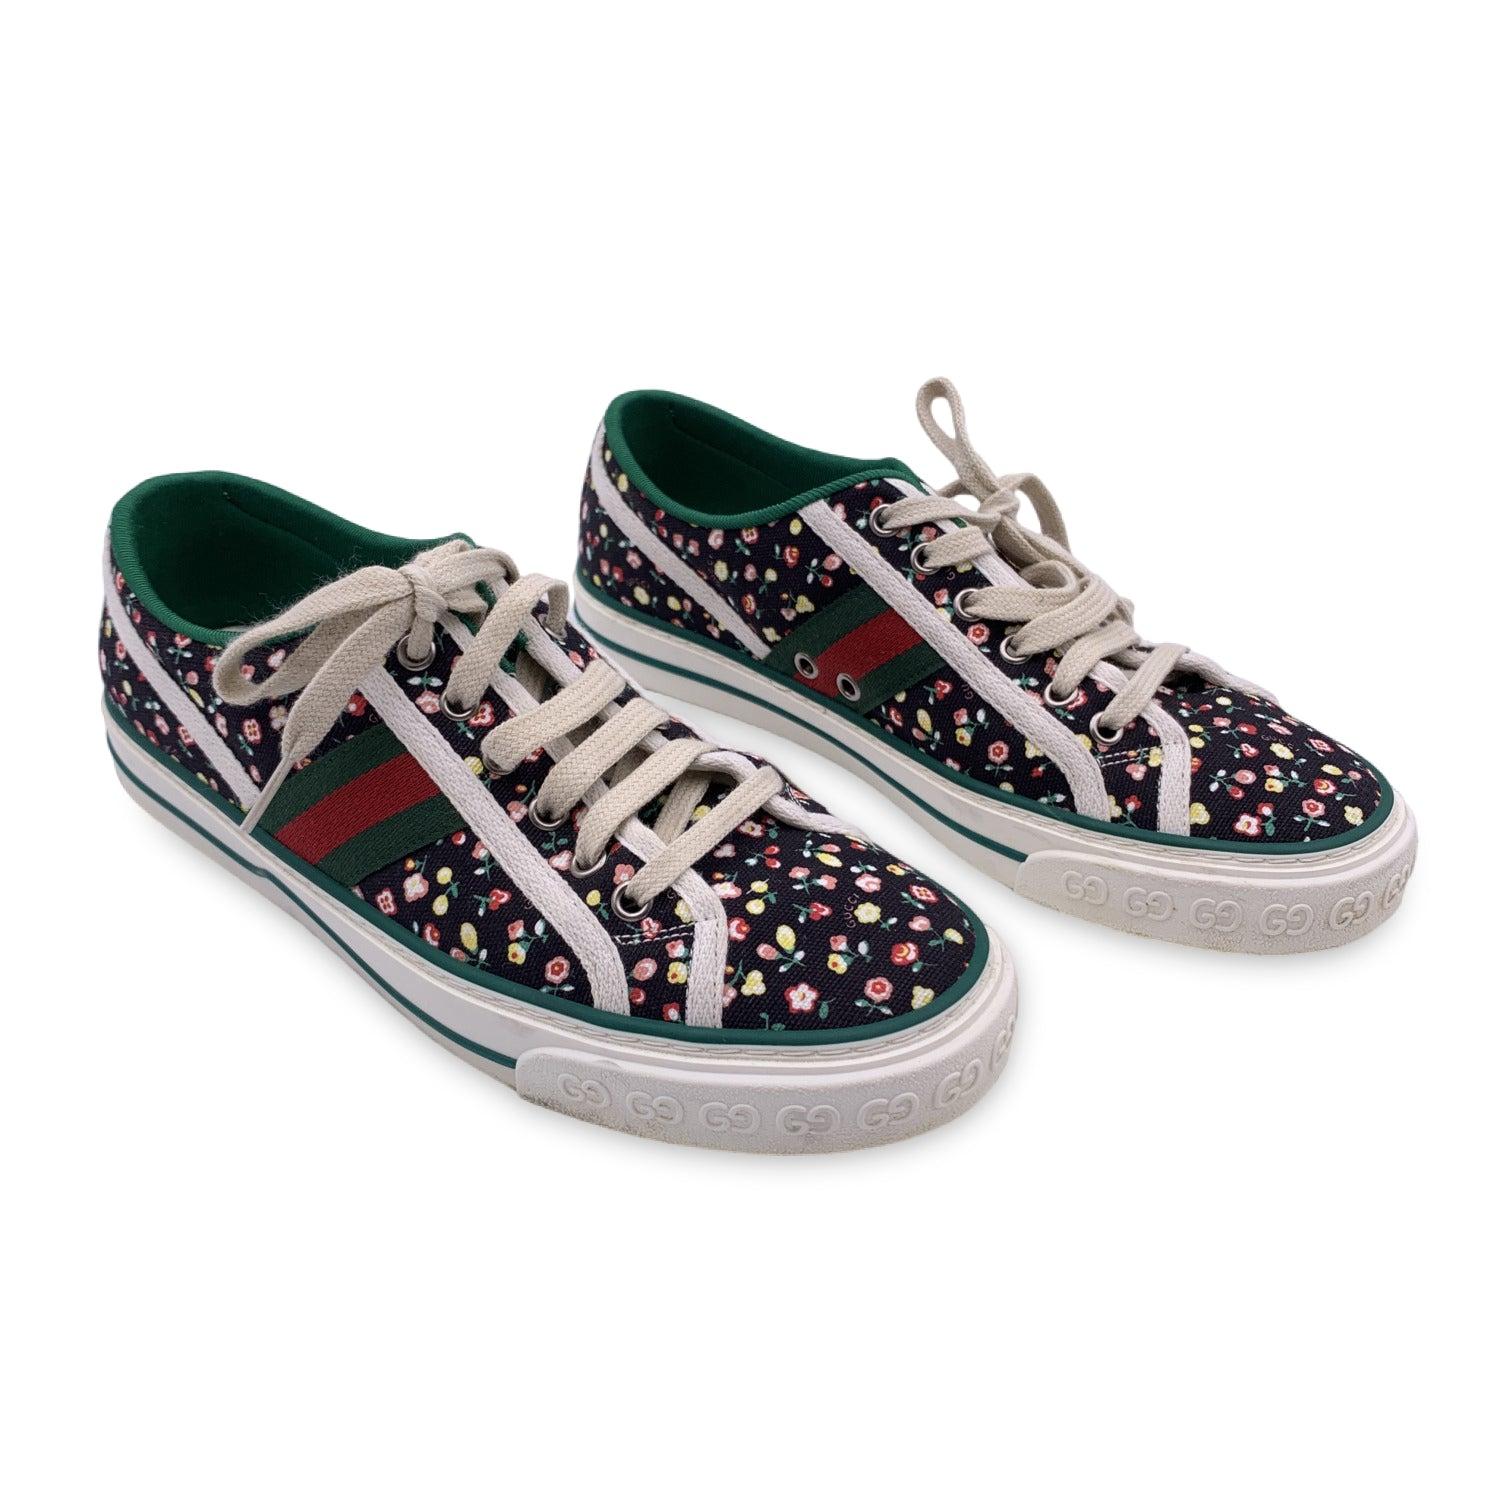 Gucci 'Gucci Tennis 1977' sneakers. Low-top canvas sneakers in black featuring multicolor floral pattern. Round toe. Lace-up closure in beige. Logo patch on the tongue. Signature web stripes in red and green at sides. Jersey lining in green. Rubber